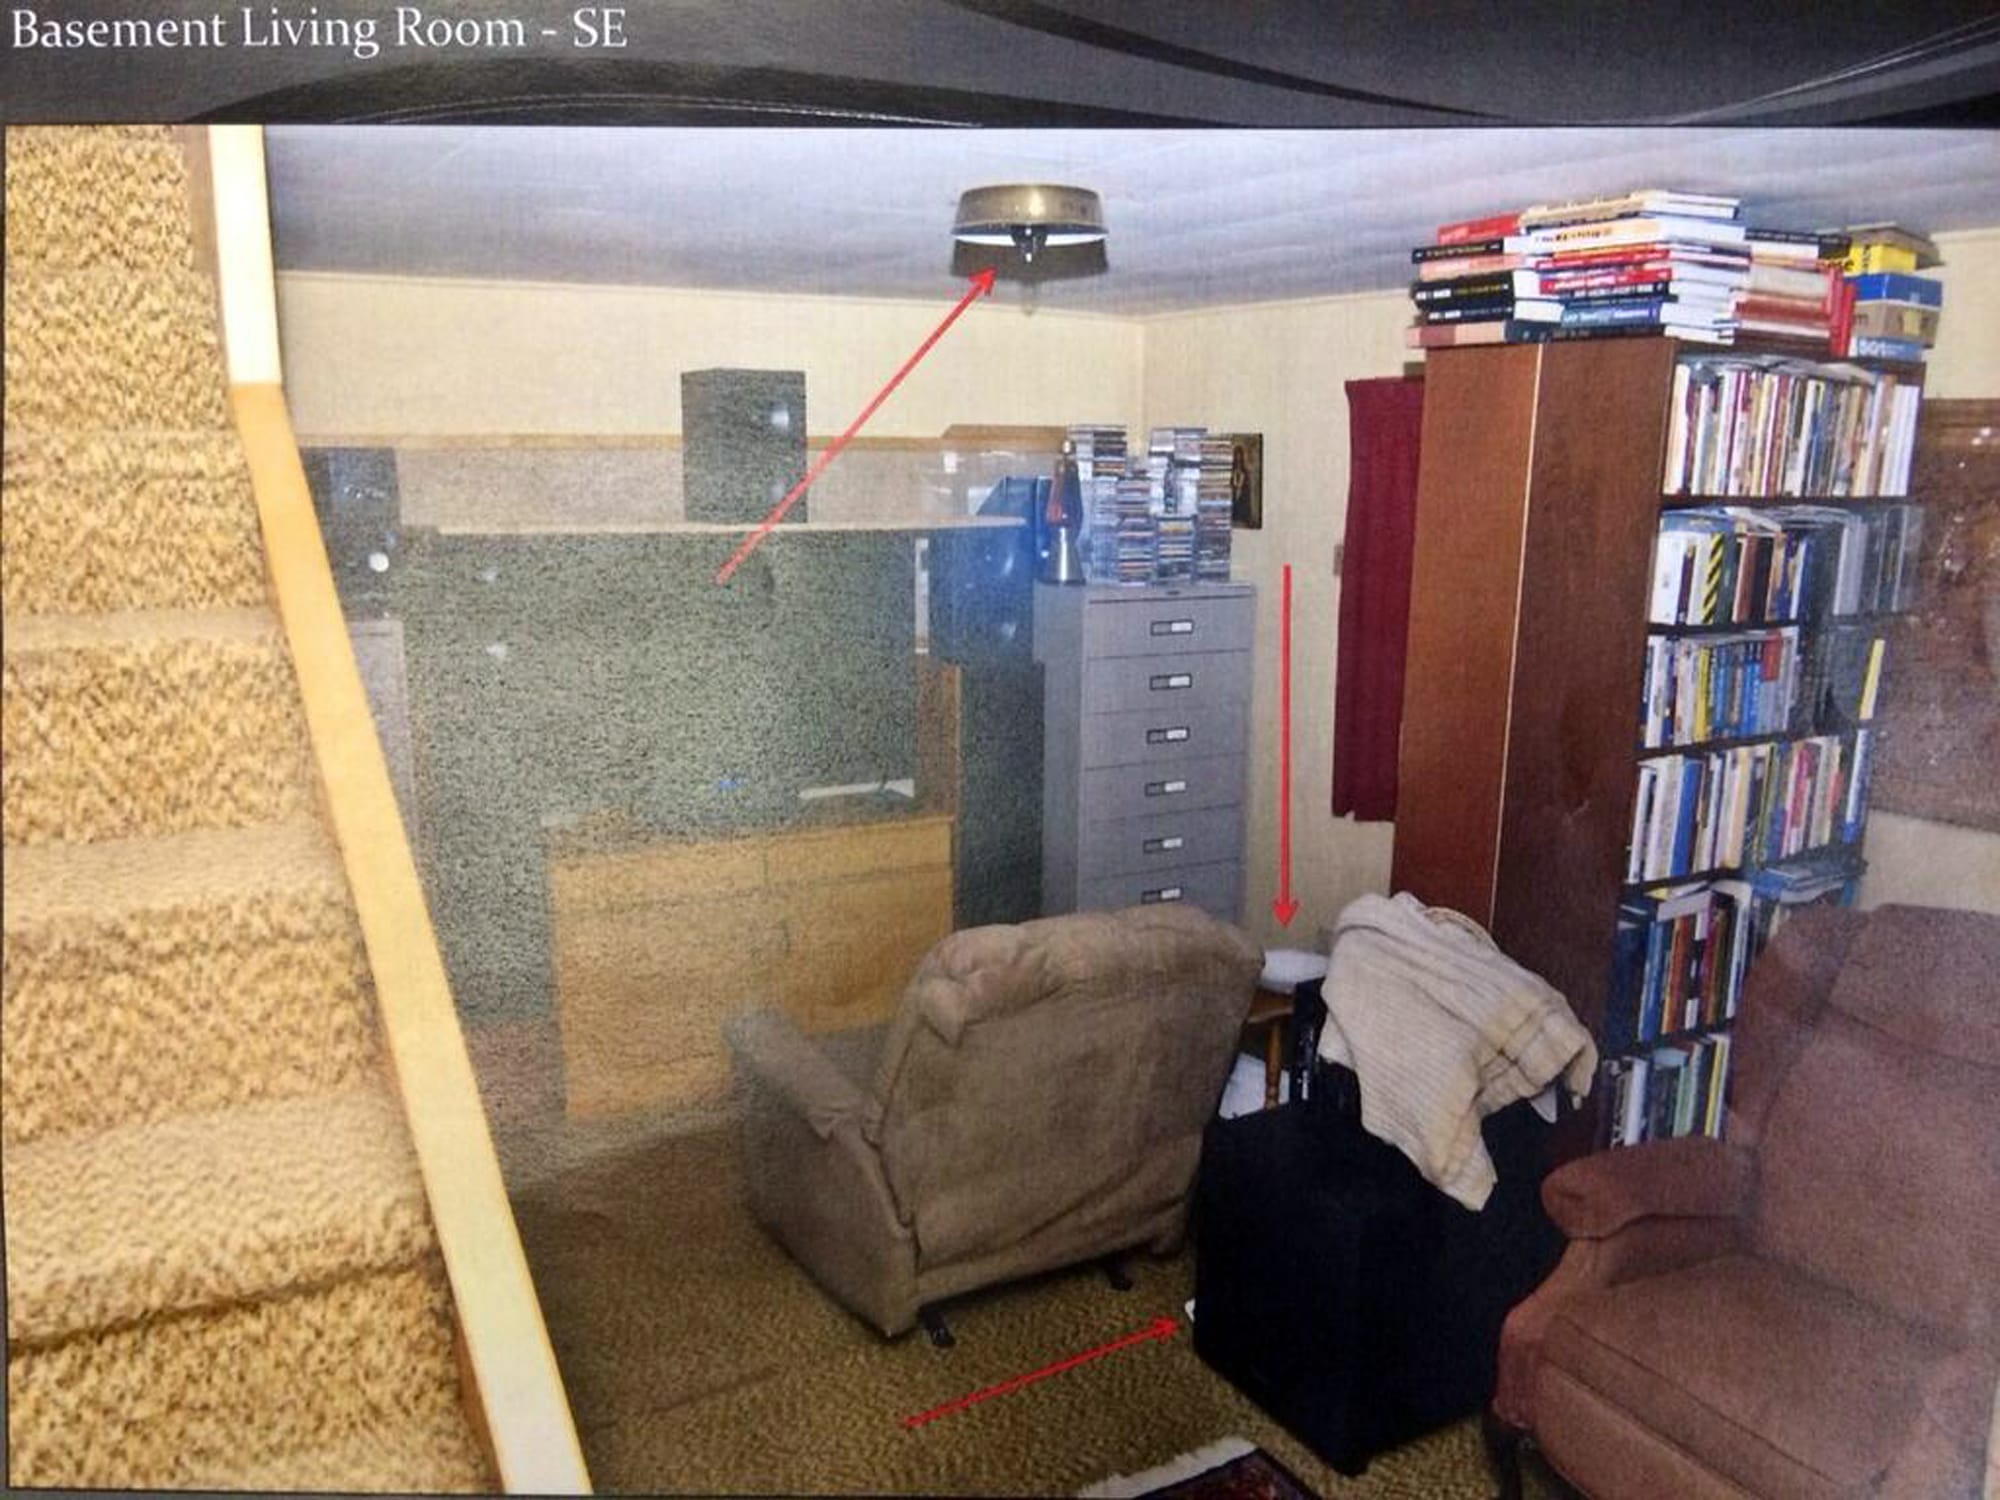 The basement of Minnesota homeowner Byron Smith where Smith shot and killed two teenagers during a break-in is seen.